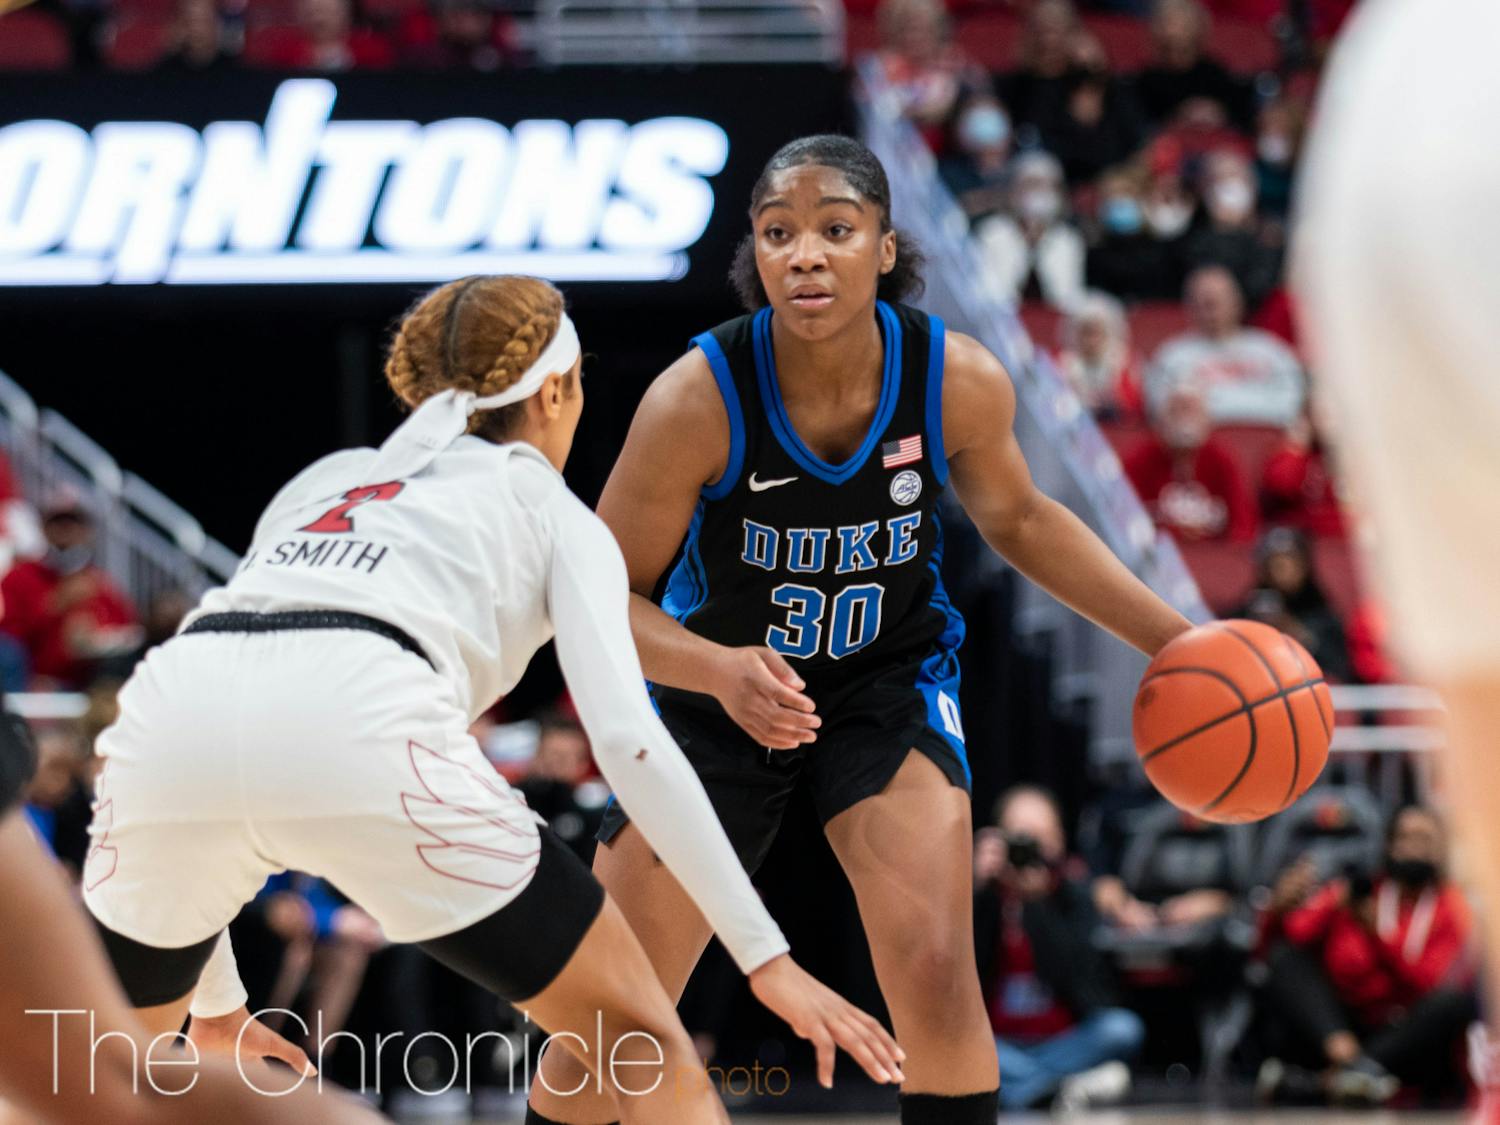 The Duke Blue Devils women's basketball team faced the Louisville Cardinals at the KFC Yum! Center this Sunday afternoon. The game ended 65-77, with the Cardinals taking the win.